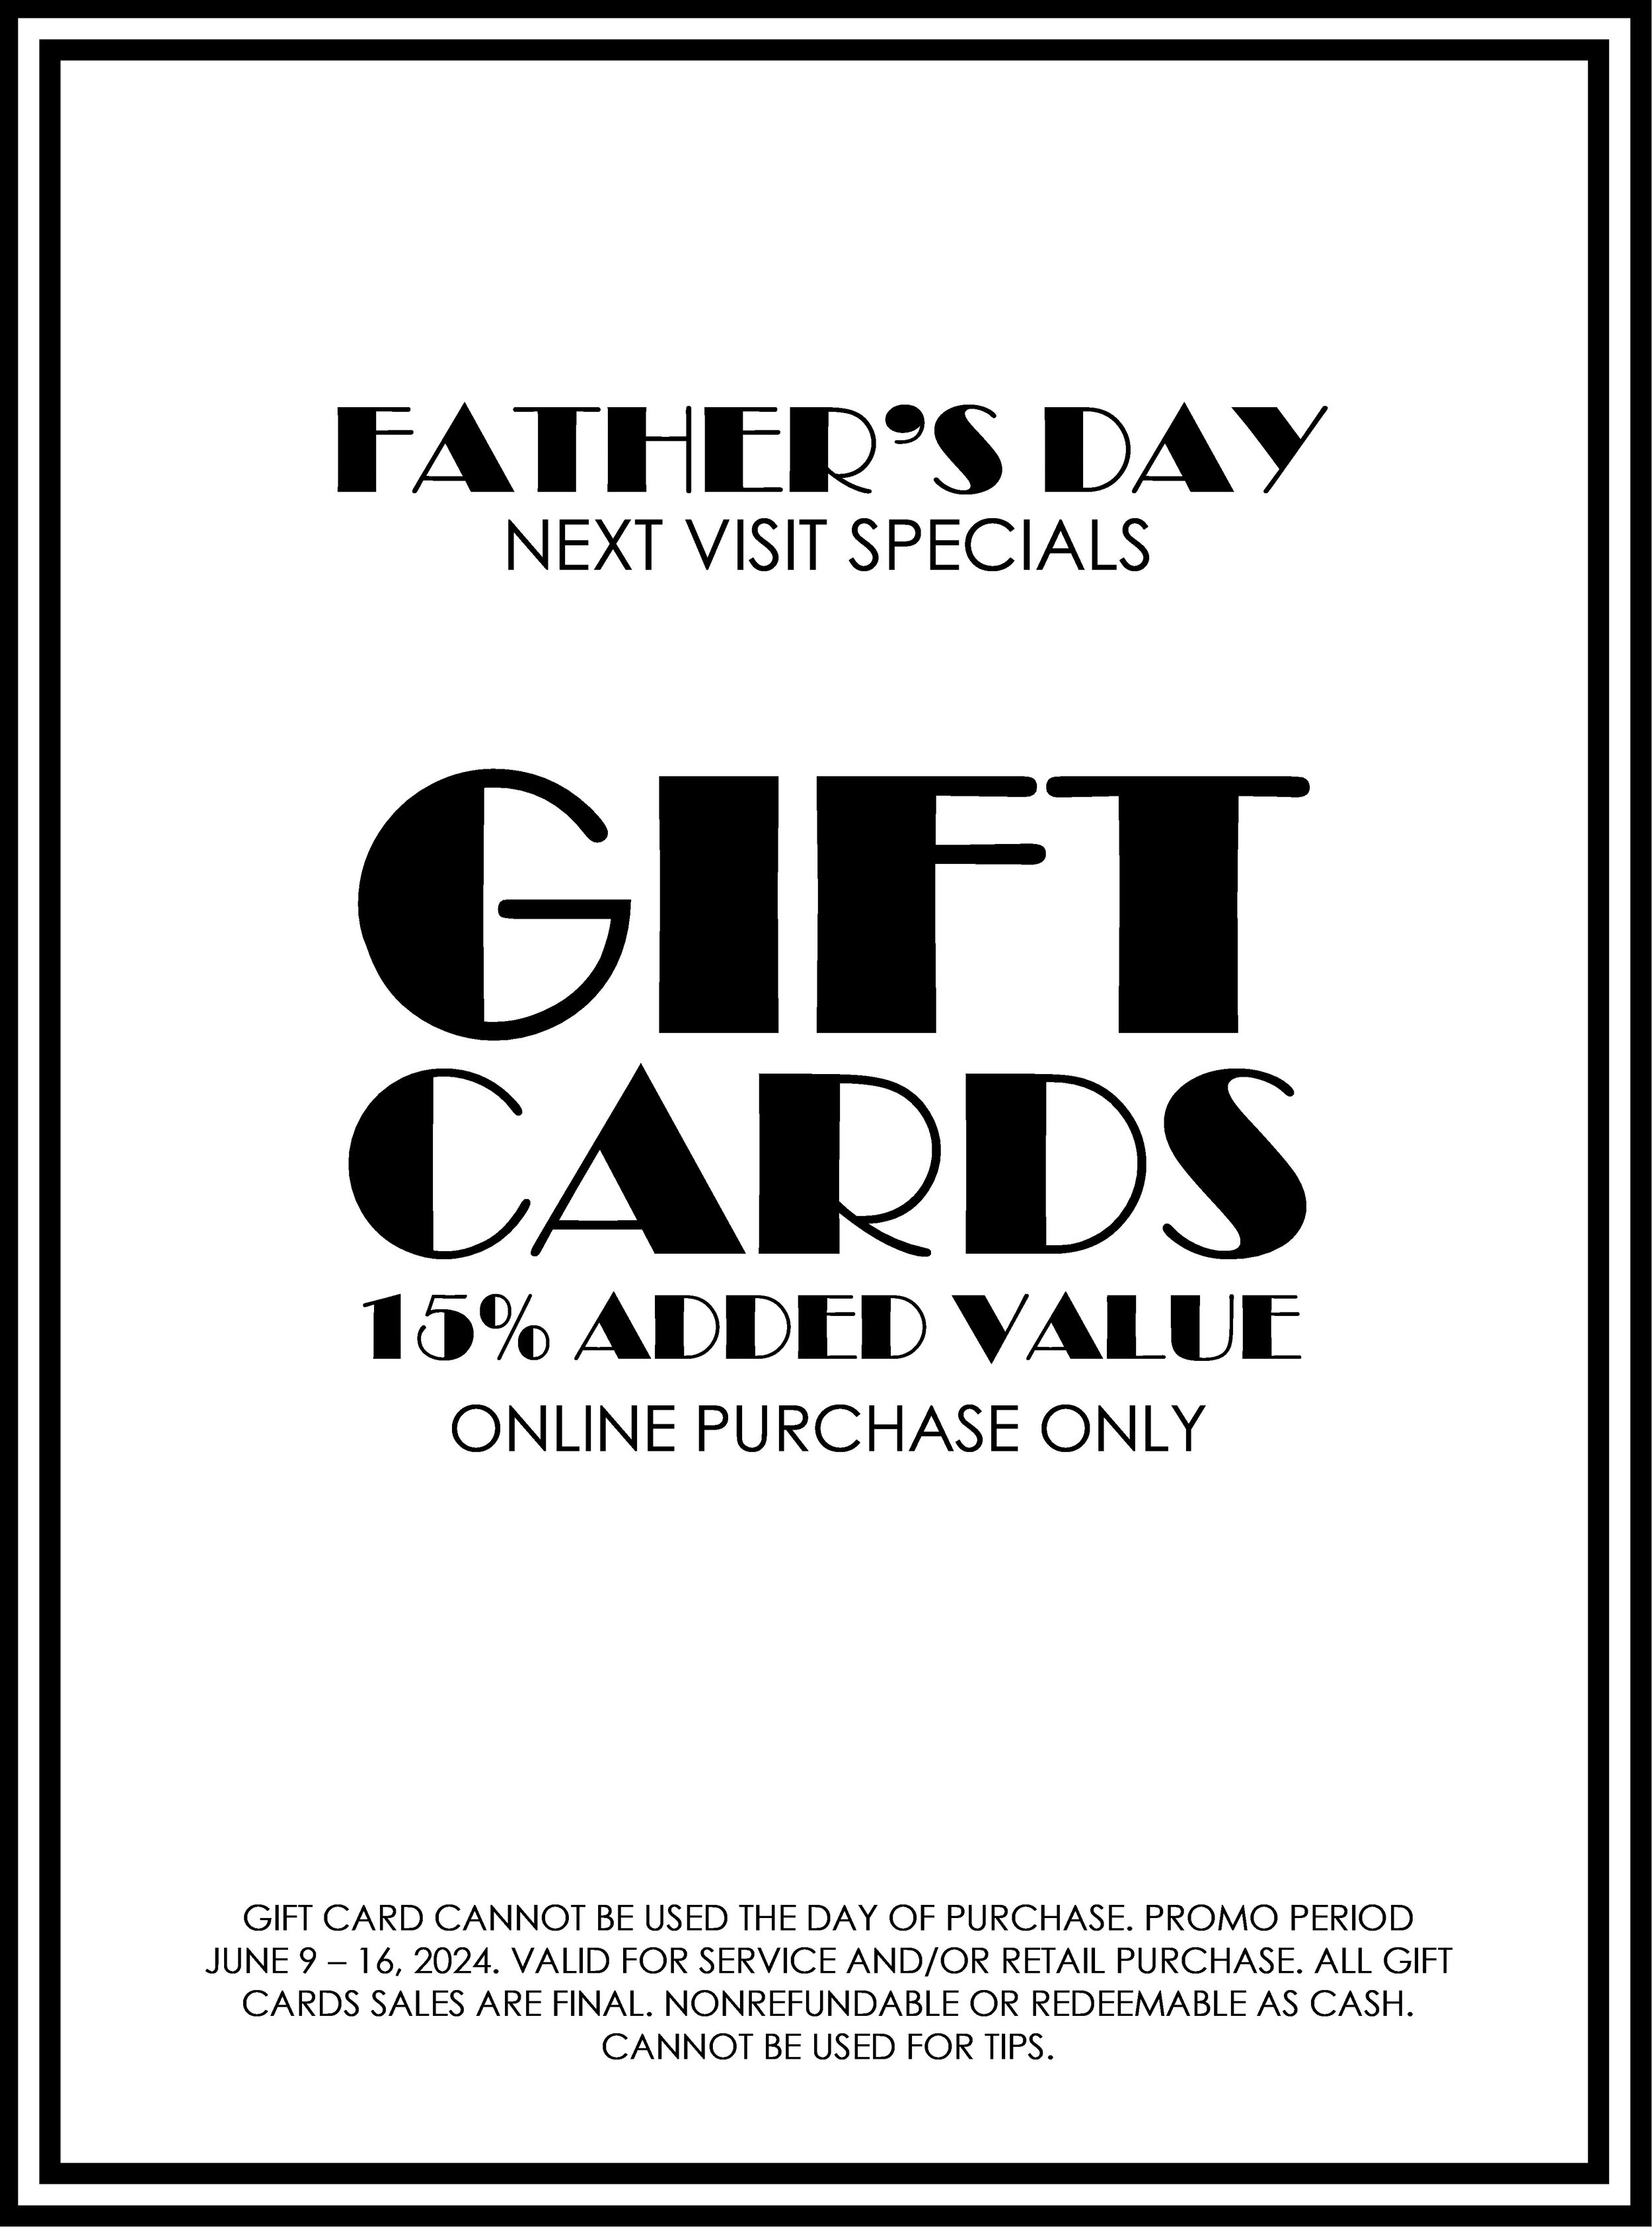 Father's Day Gift Cards Special 2024 Salon Council.jpg